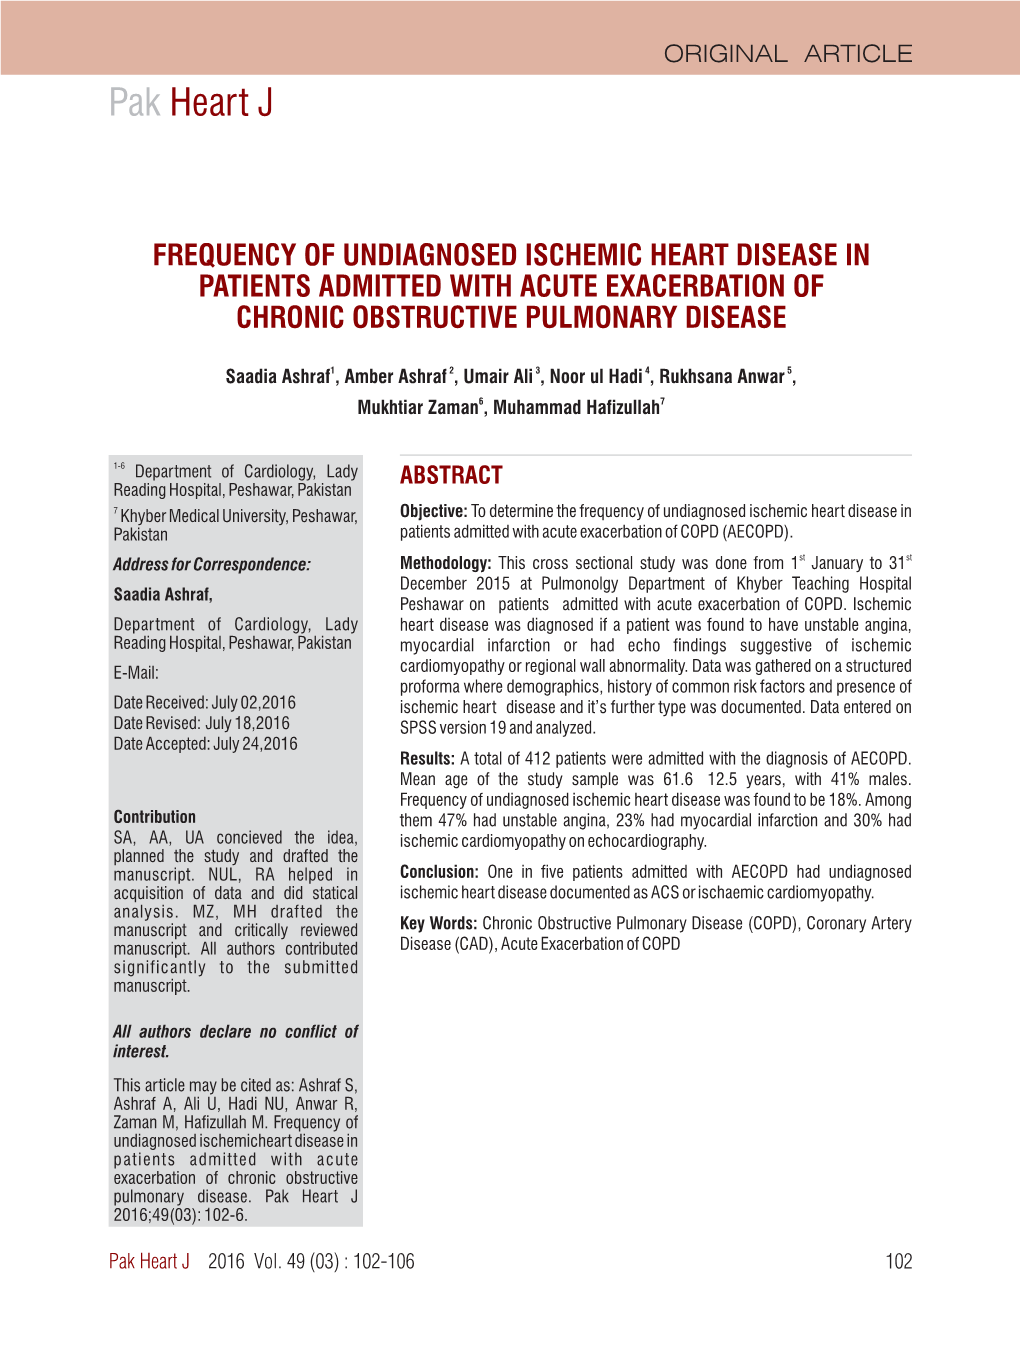 Frequency of Undiagnosed Ischemic Heart Disease in Patients Admitted with Acute Exacerbation of Chronic Obstructive Pulmonary Disease